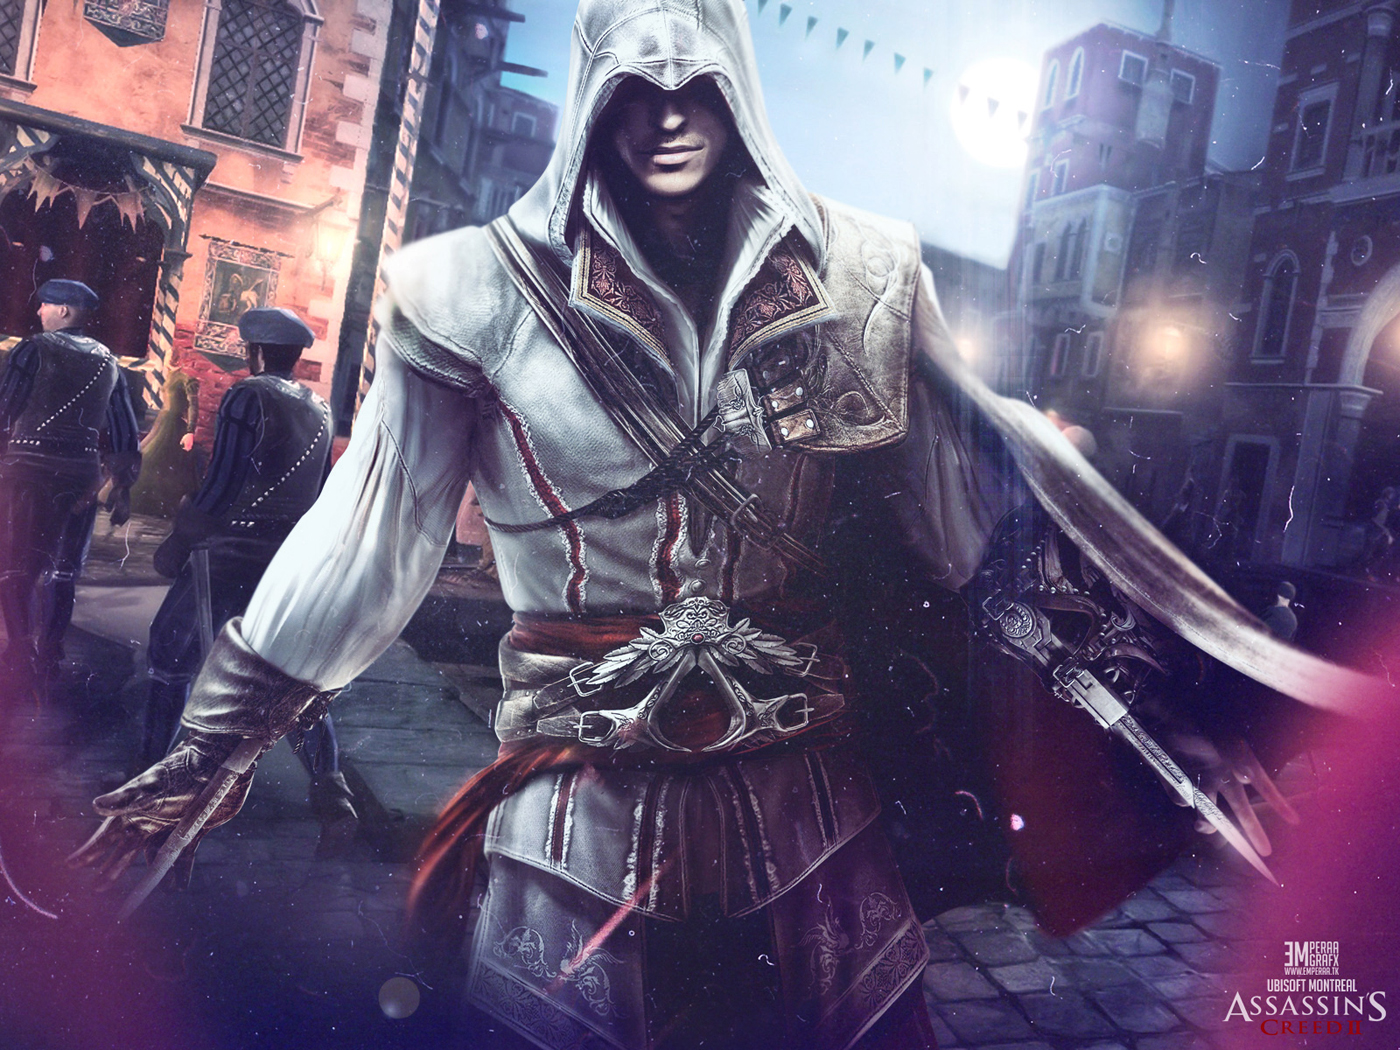 Assassin's Creed 2 Background - HD Wallpaper 